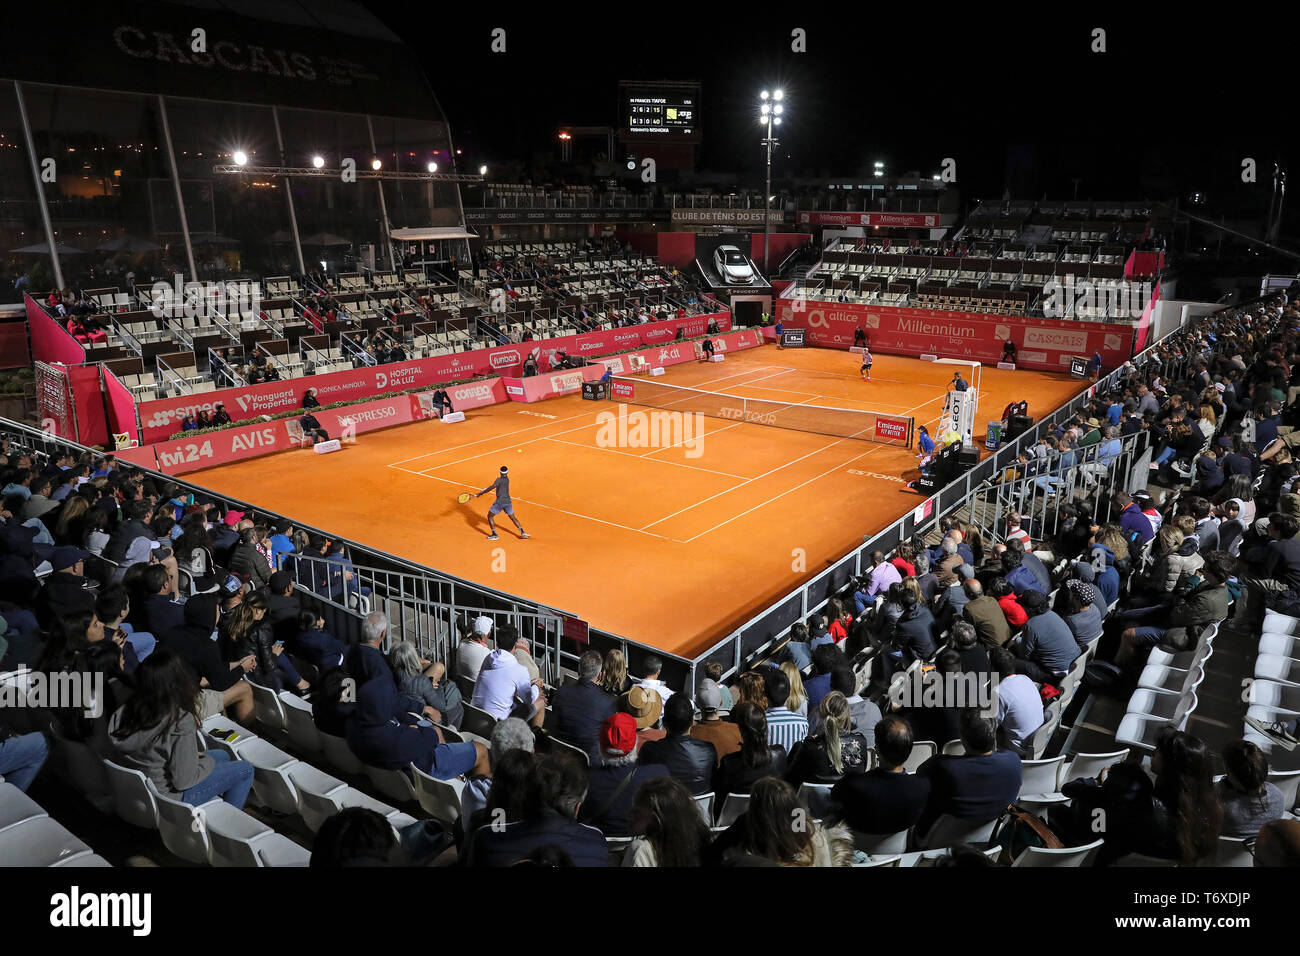 General view of the main tennis court during the Day 6 of Millennium Estoril  Open 2019 Stock Photo - Alamy